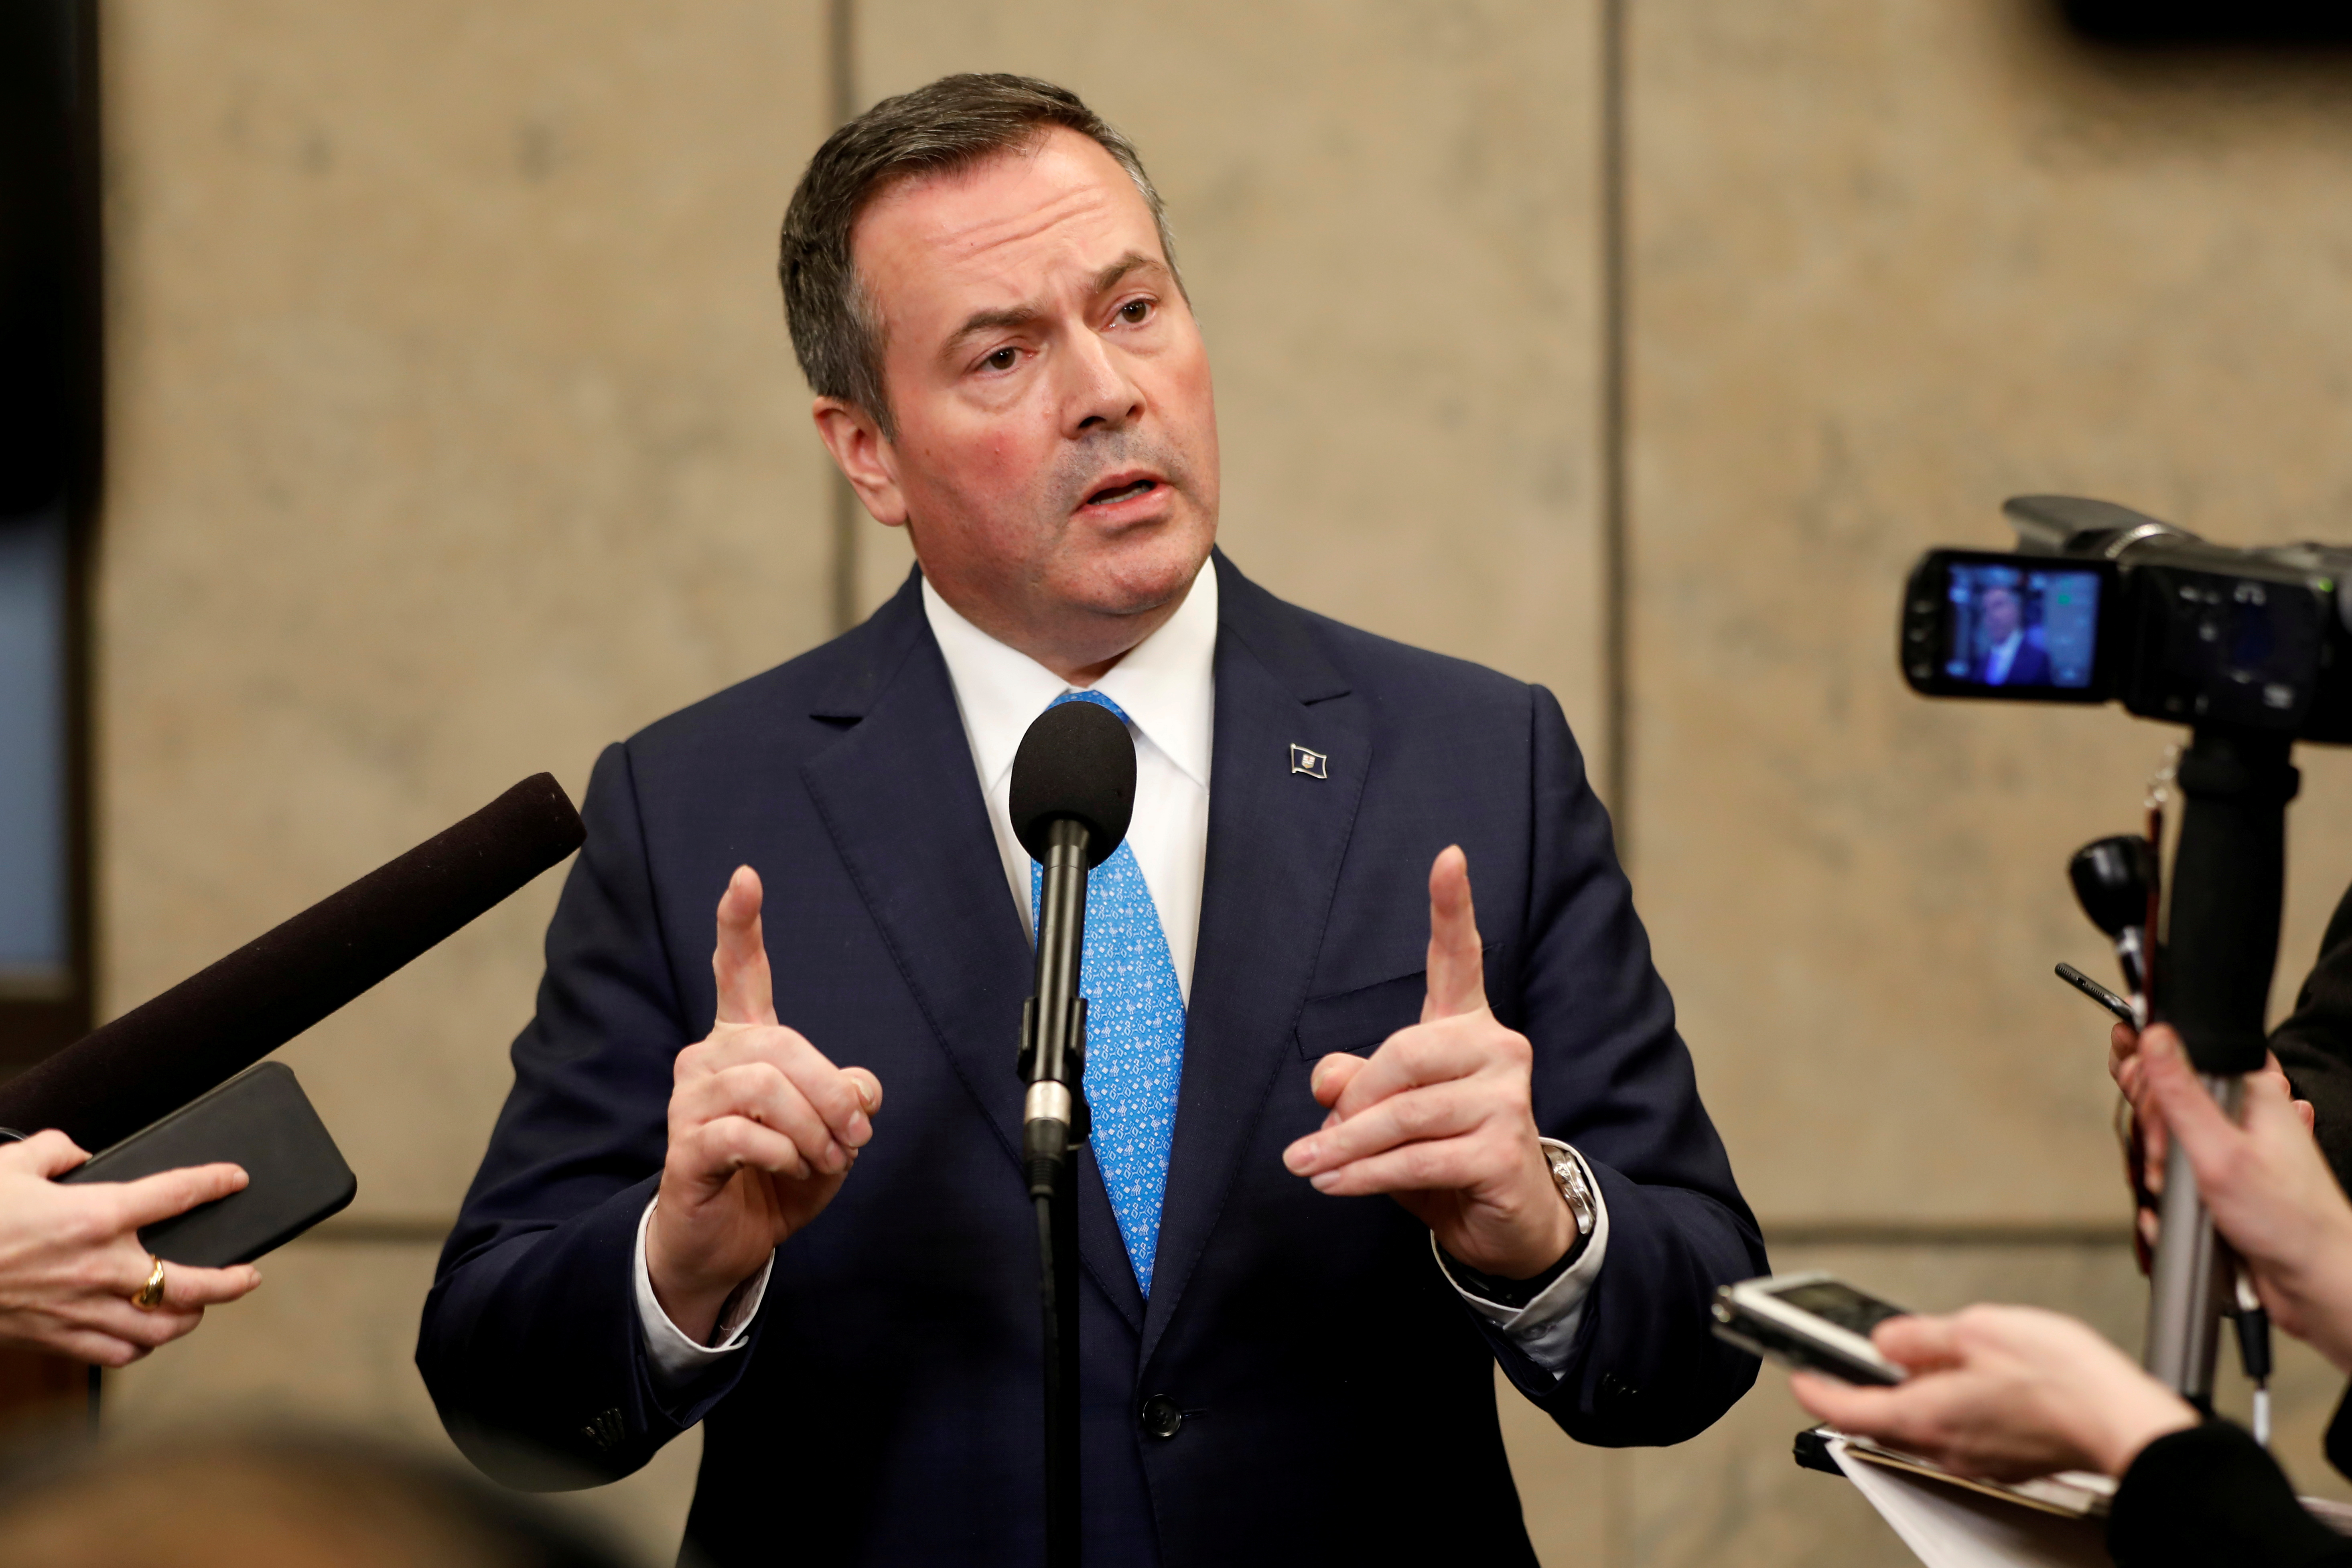 Alberta Premier Jason Kenney speaks during a news conference after meeting with Canada's Prime Minister Justin Trudeau on Parliament Hill in Ottawa